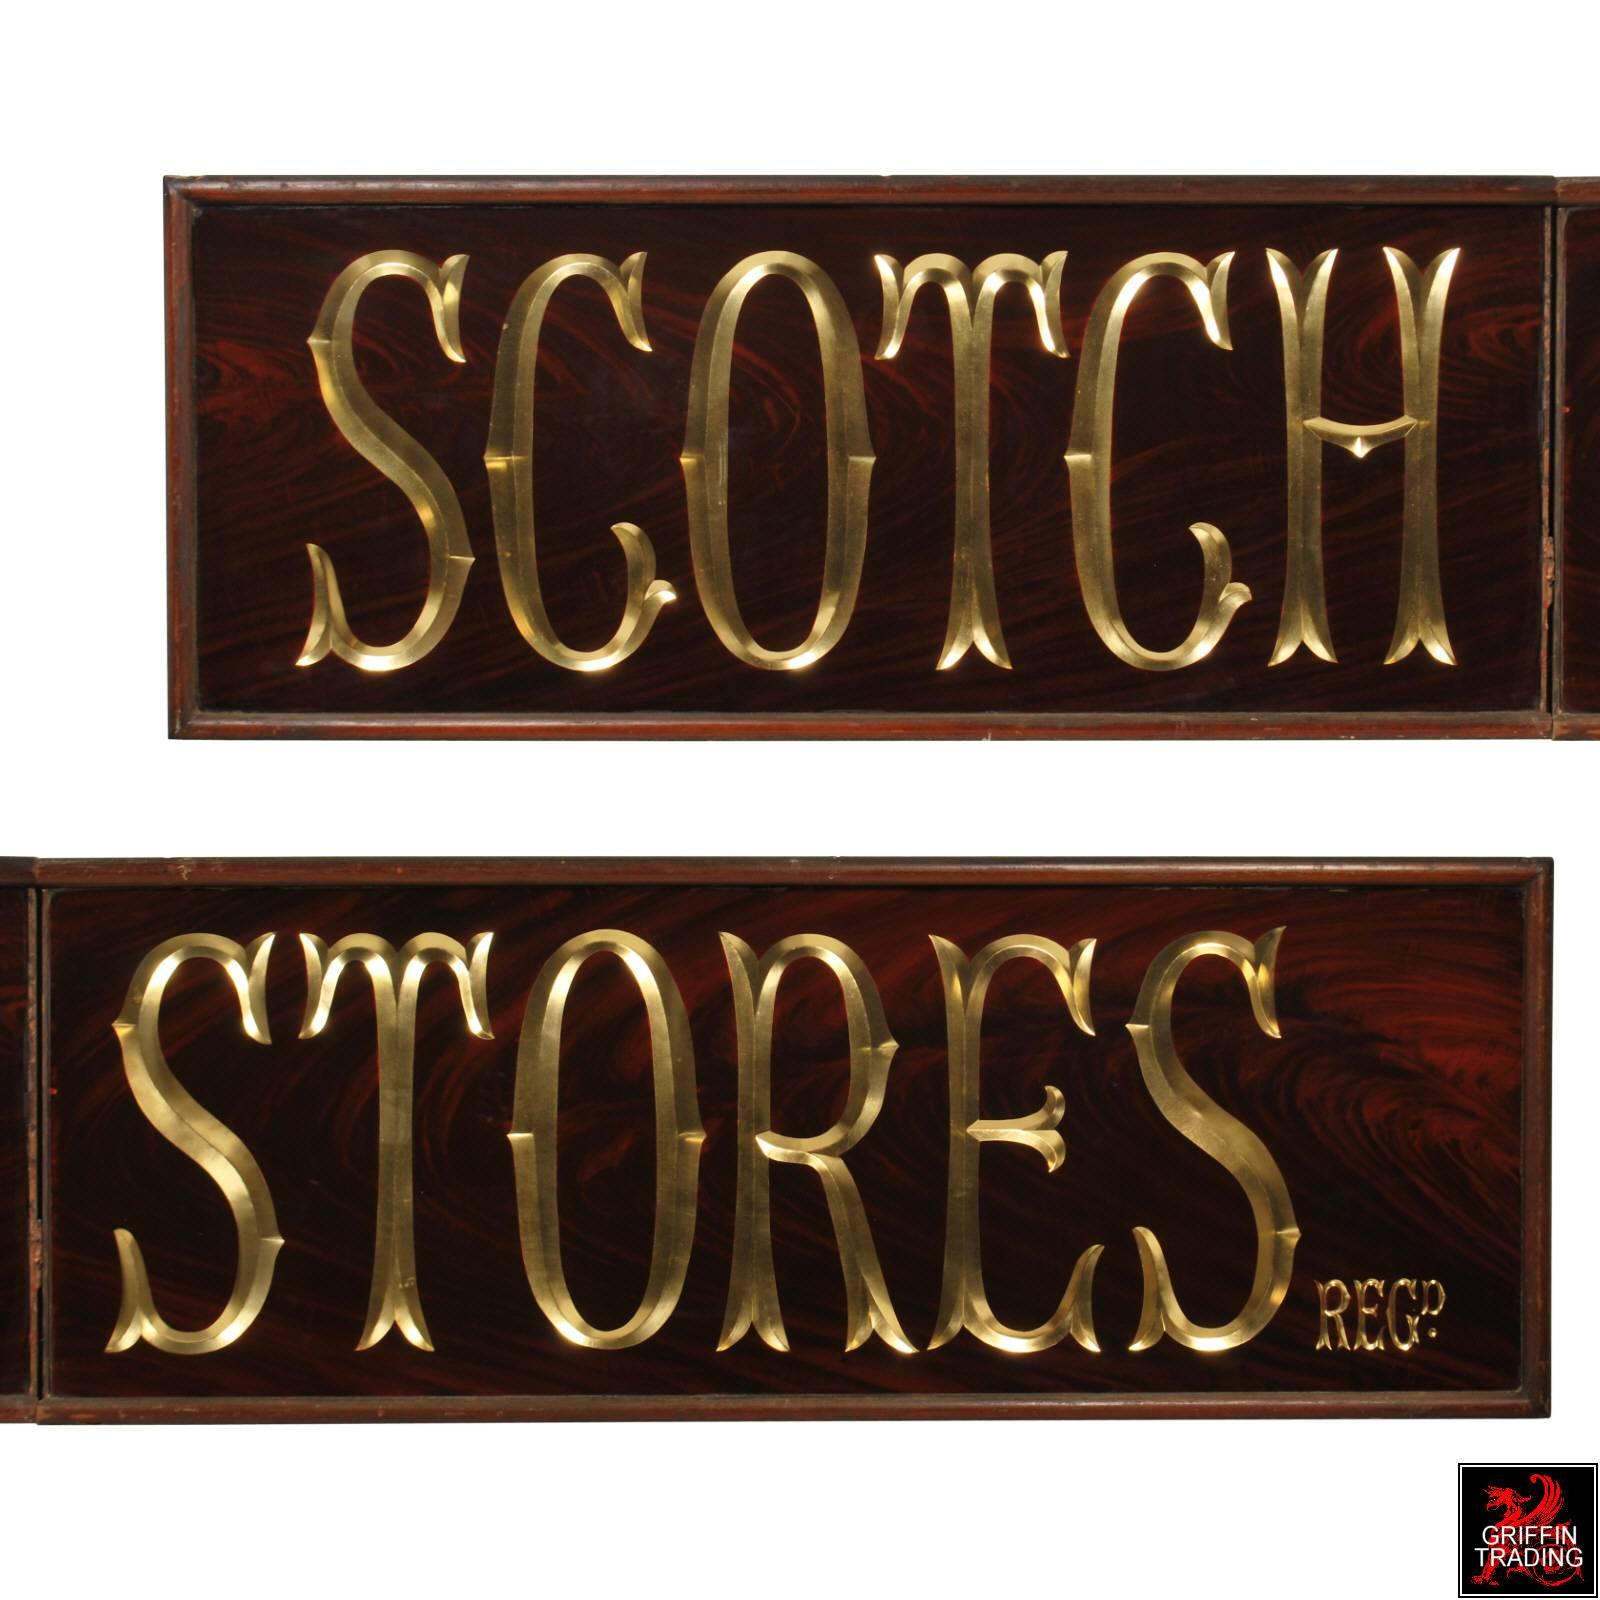 Hand-Carved Scotch Stores Antique Pub Sign with Gold Leaf Lettering For Sale